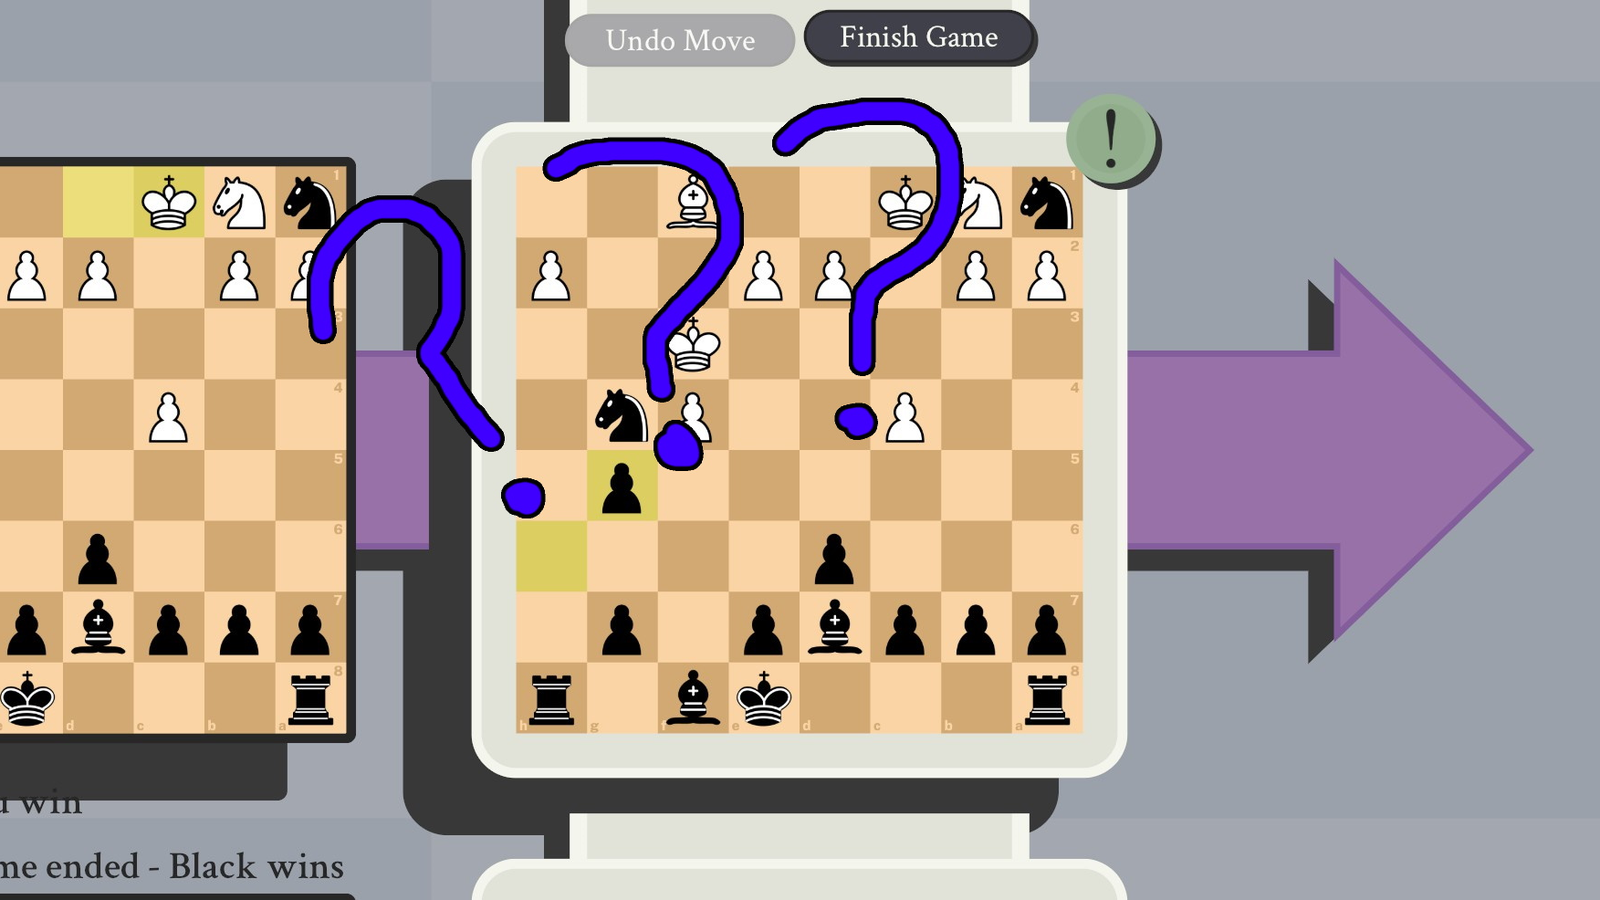 In 5D Chess, the only winning move is wait, what? WHAT